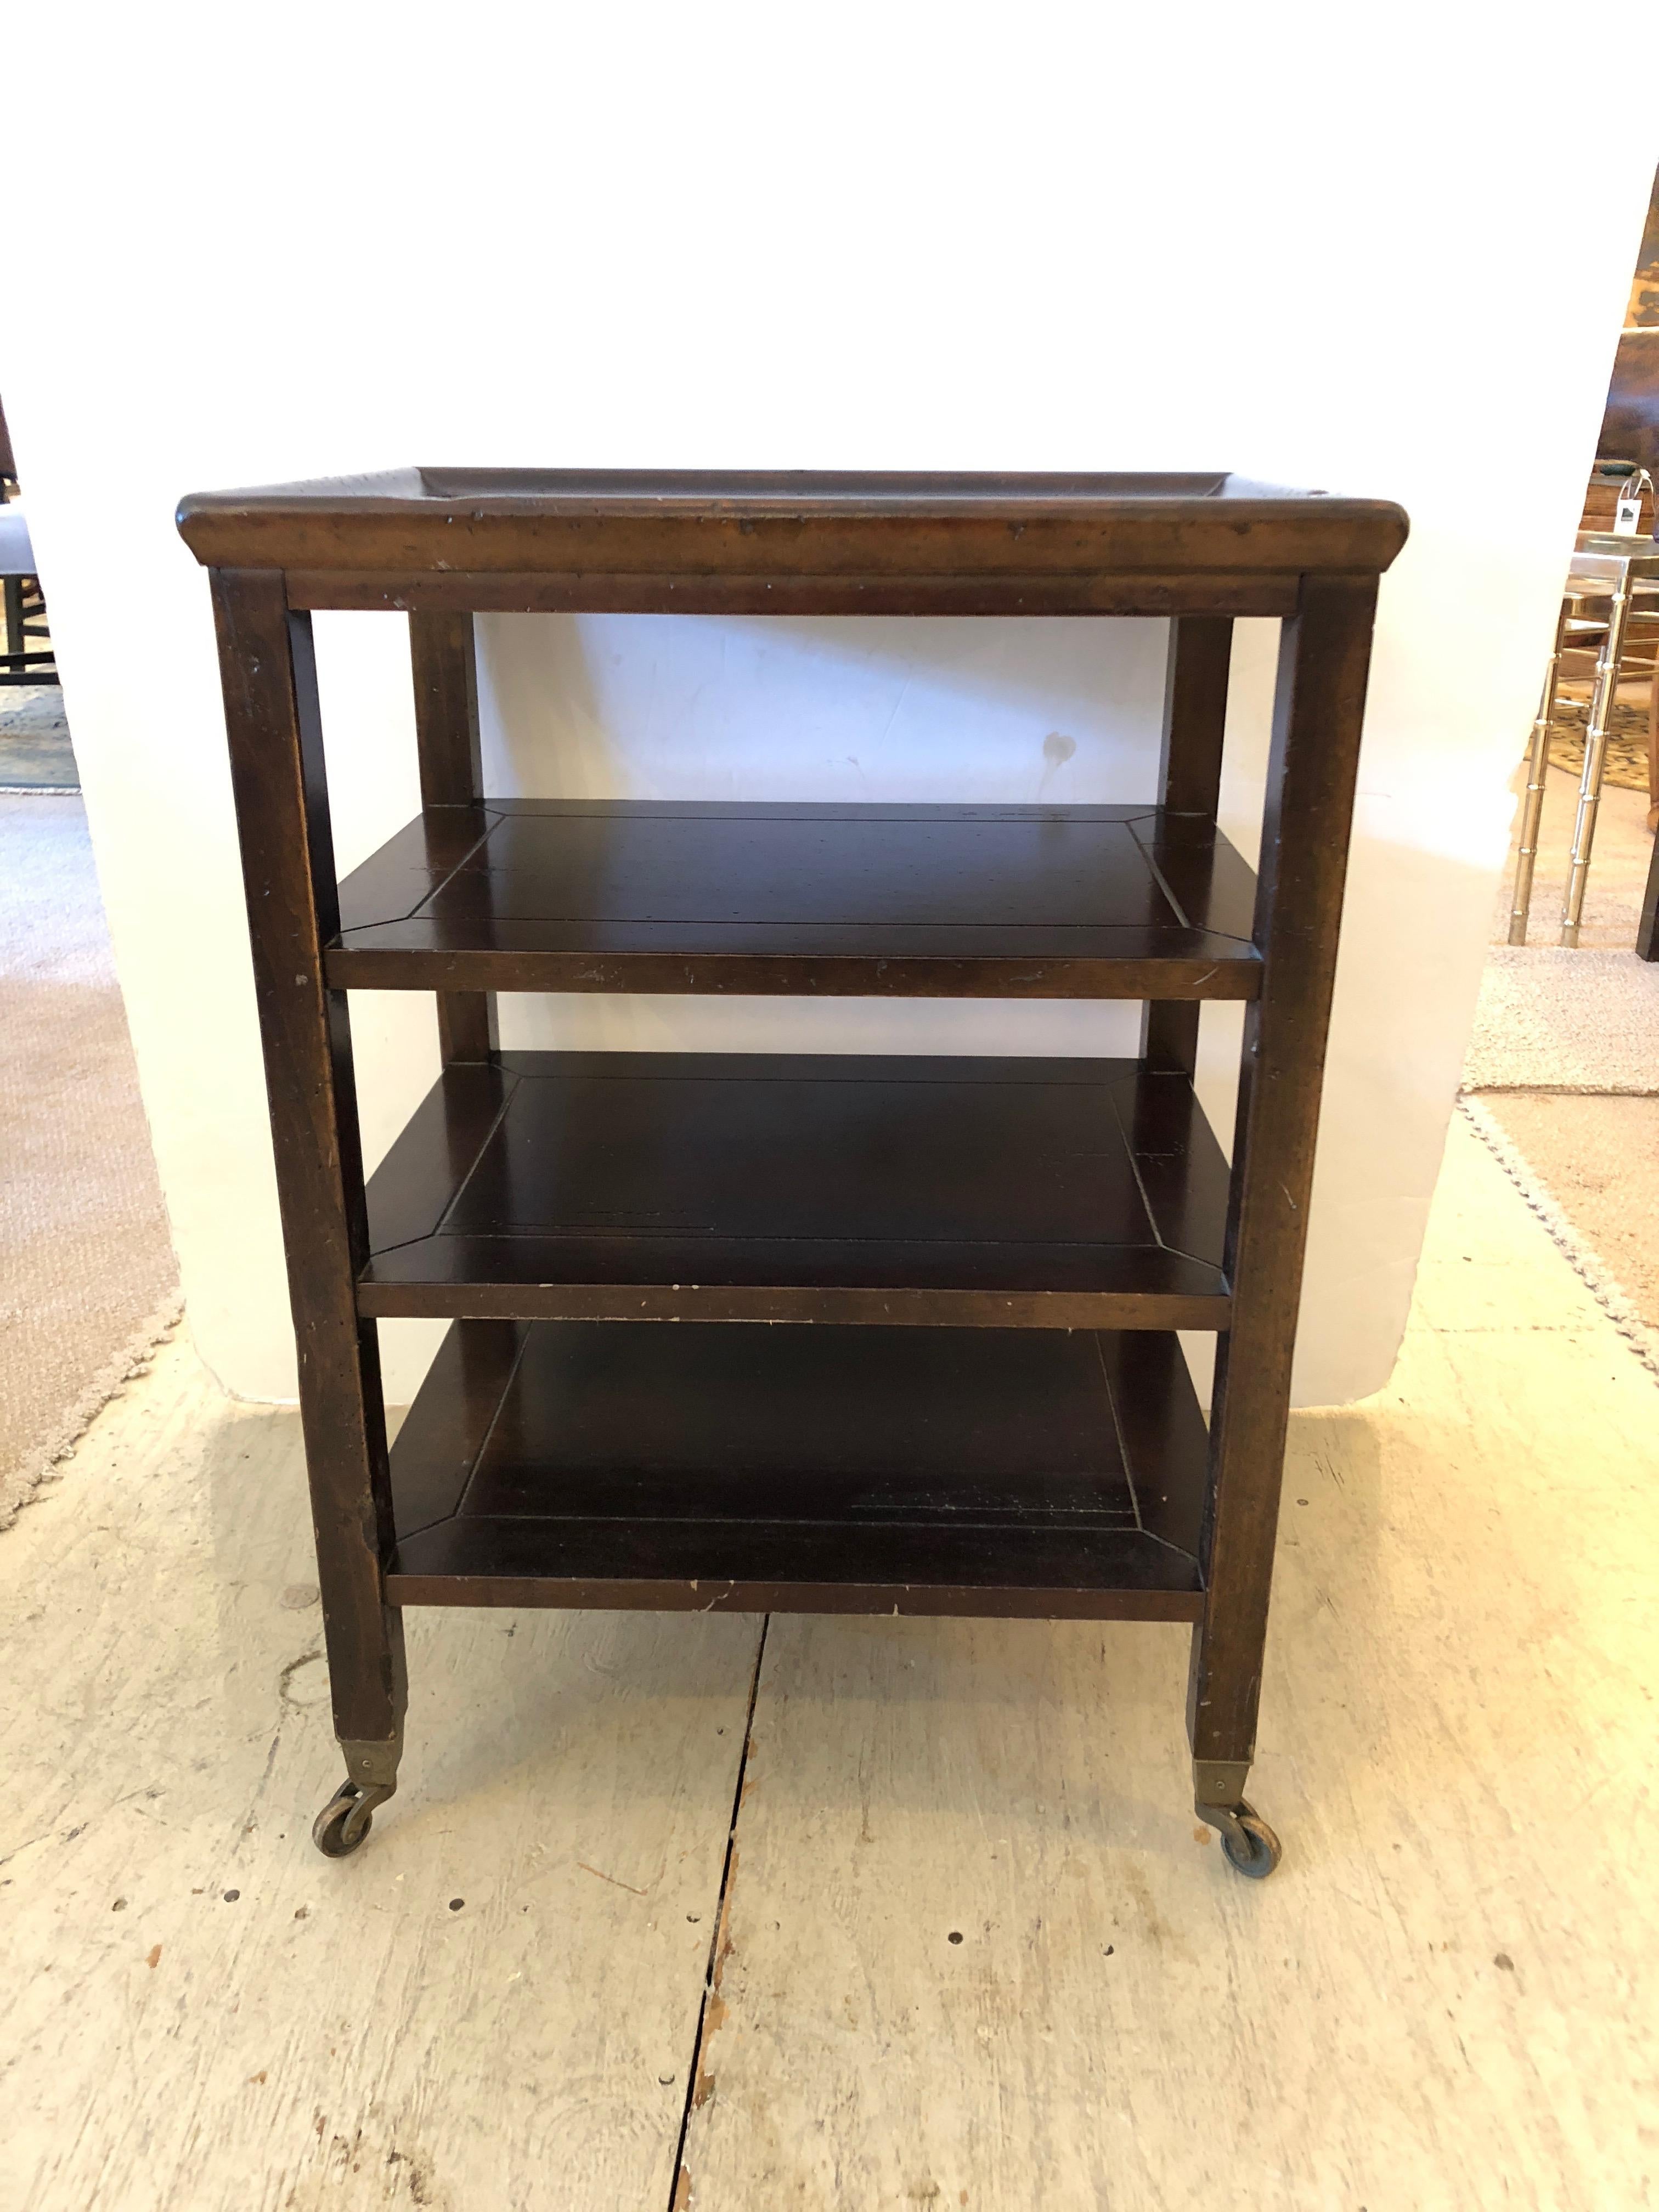 Very handsome, beautifully made heavy walnut side table by Baker having 4 shelves, 6